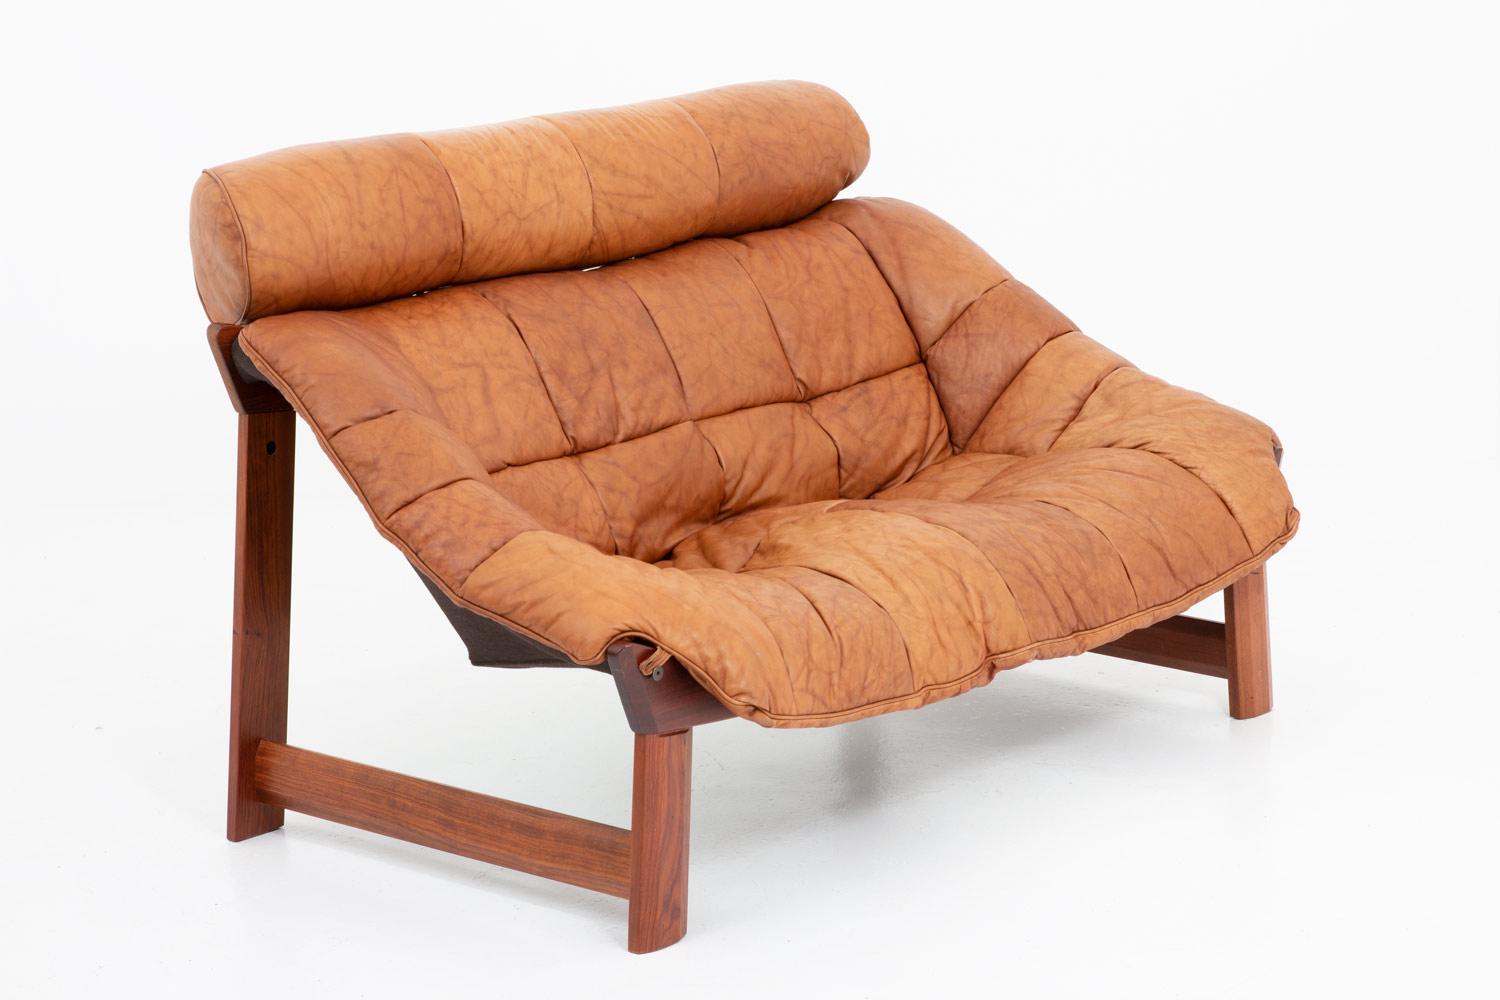 Walnut Percival Lafér-Style Sofas and Lounge Chair in Cognac Leather